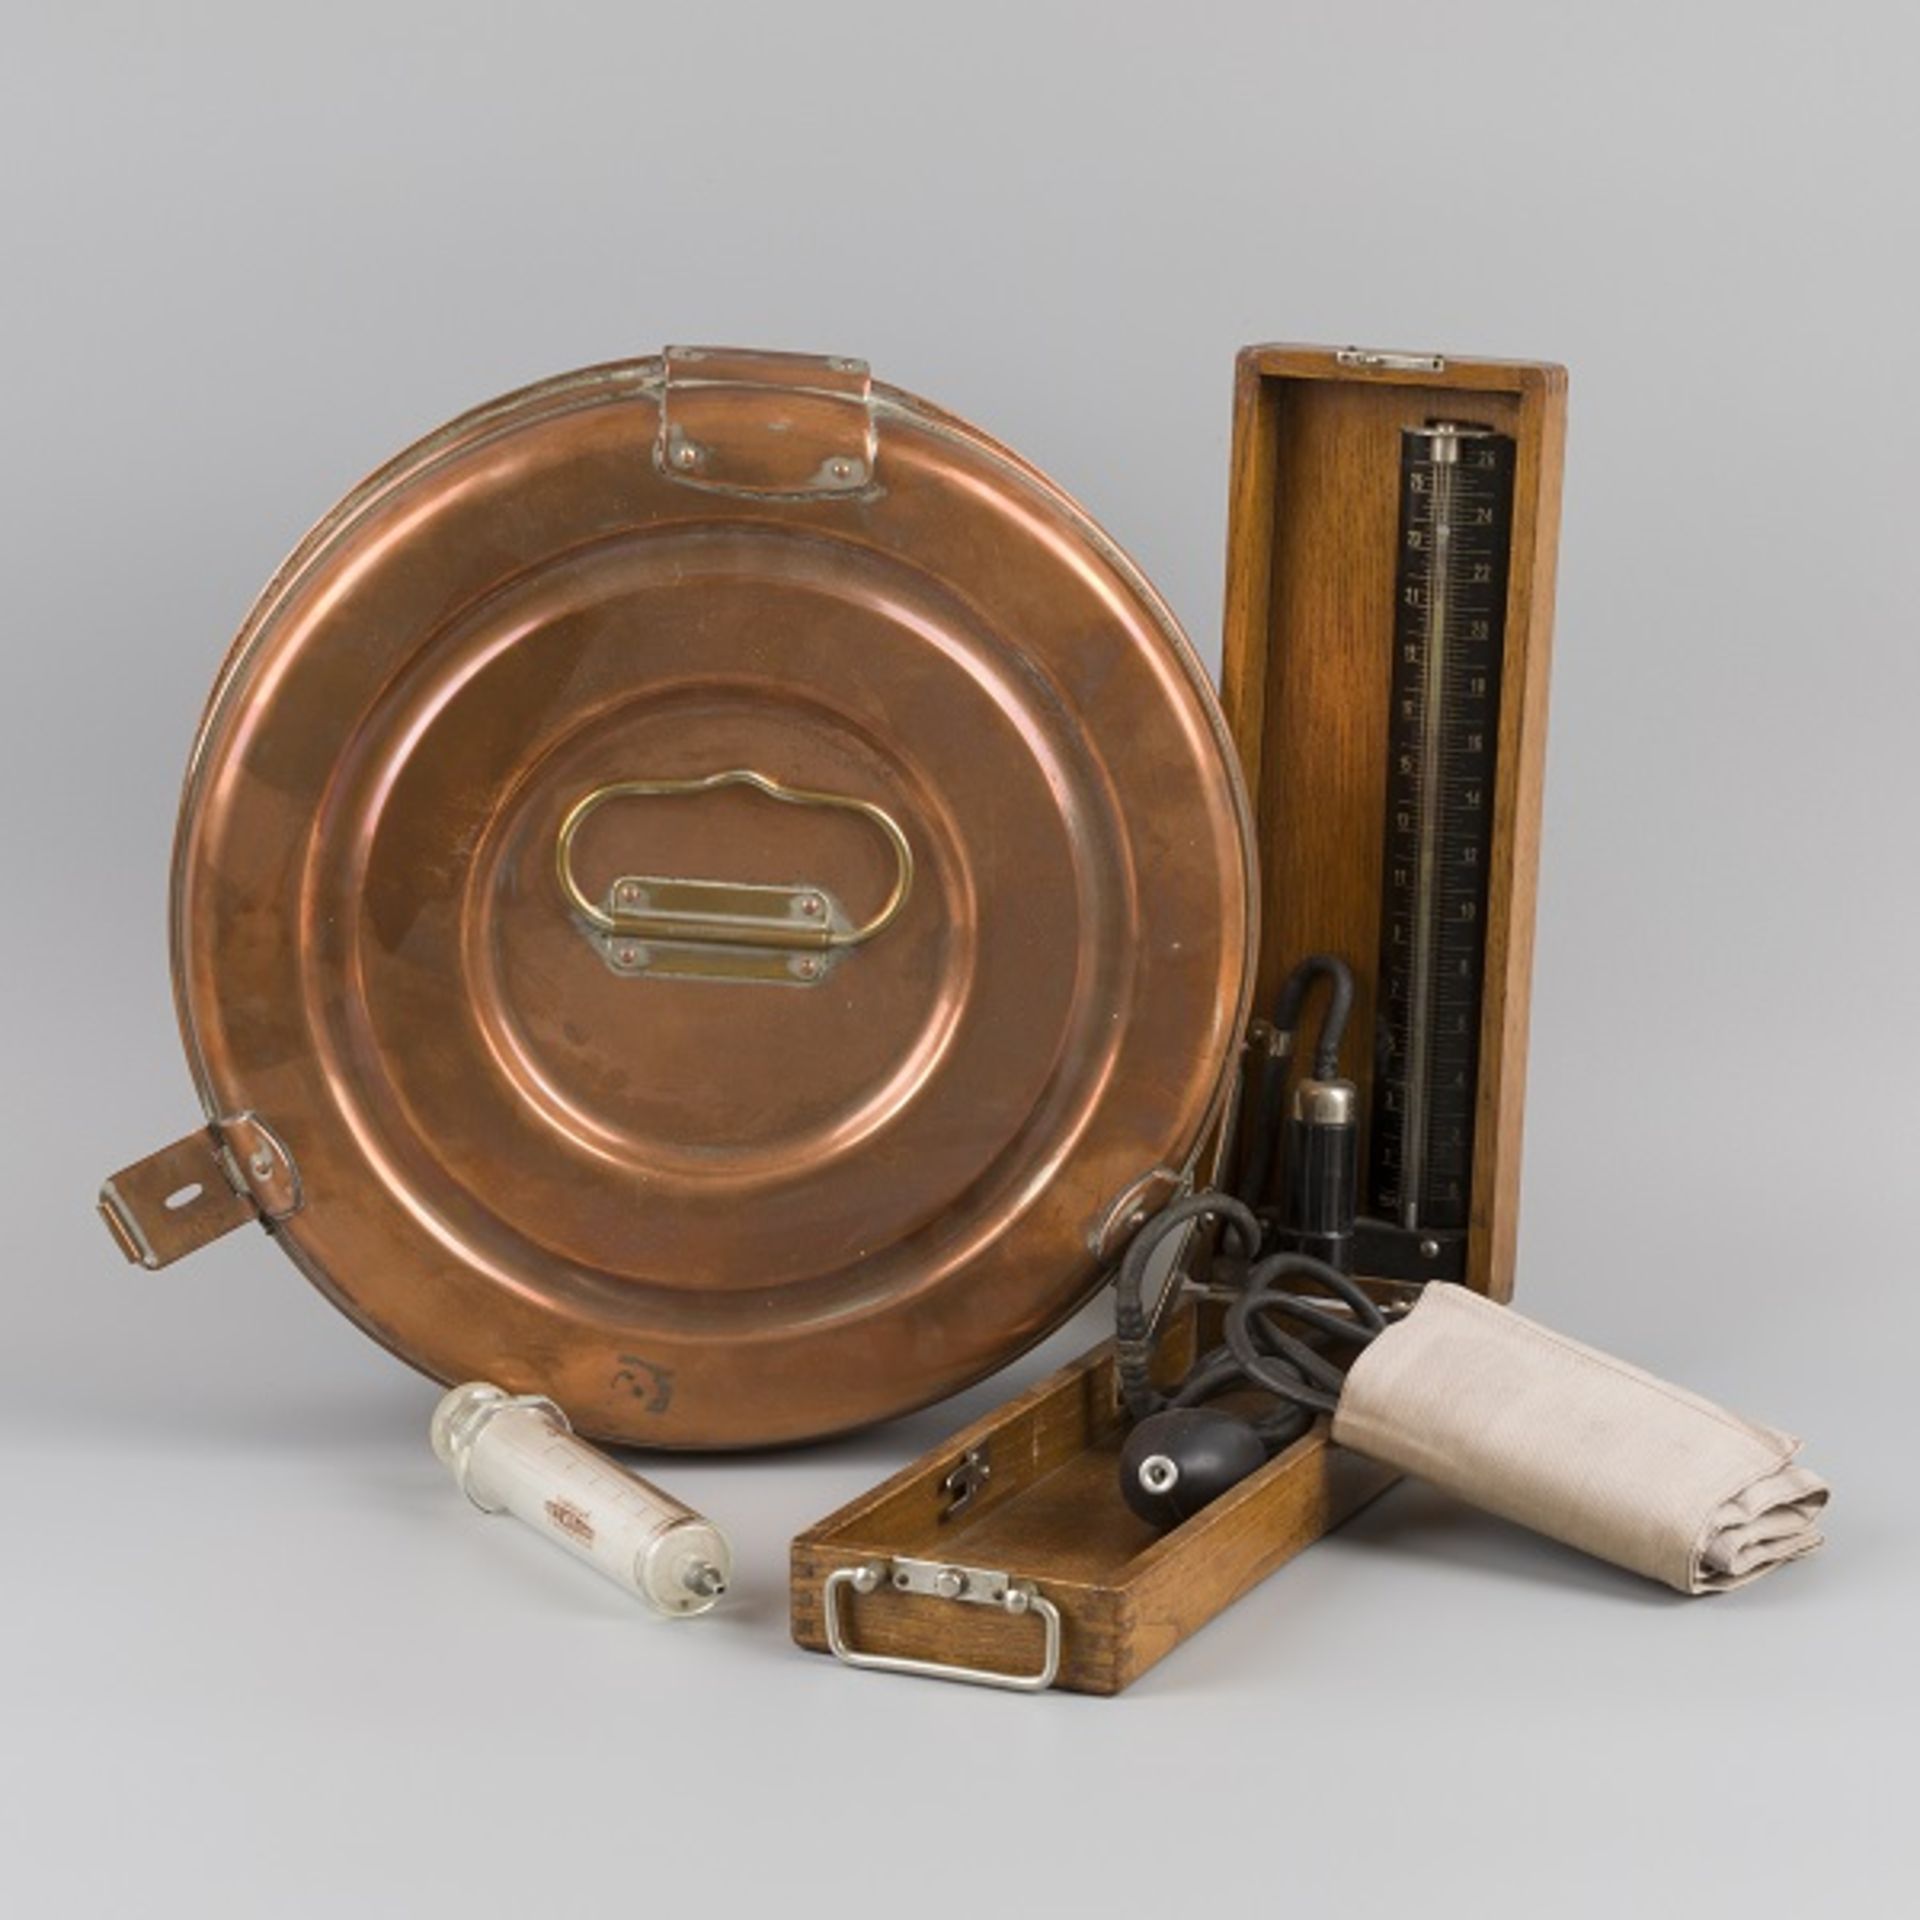 A round brass doctors instrument sterilisation box with glass spout and bloodpressure device, medica